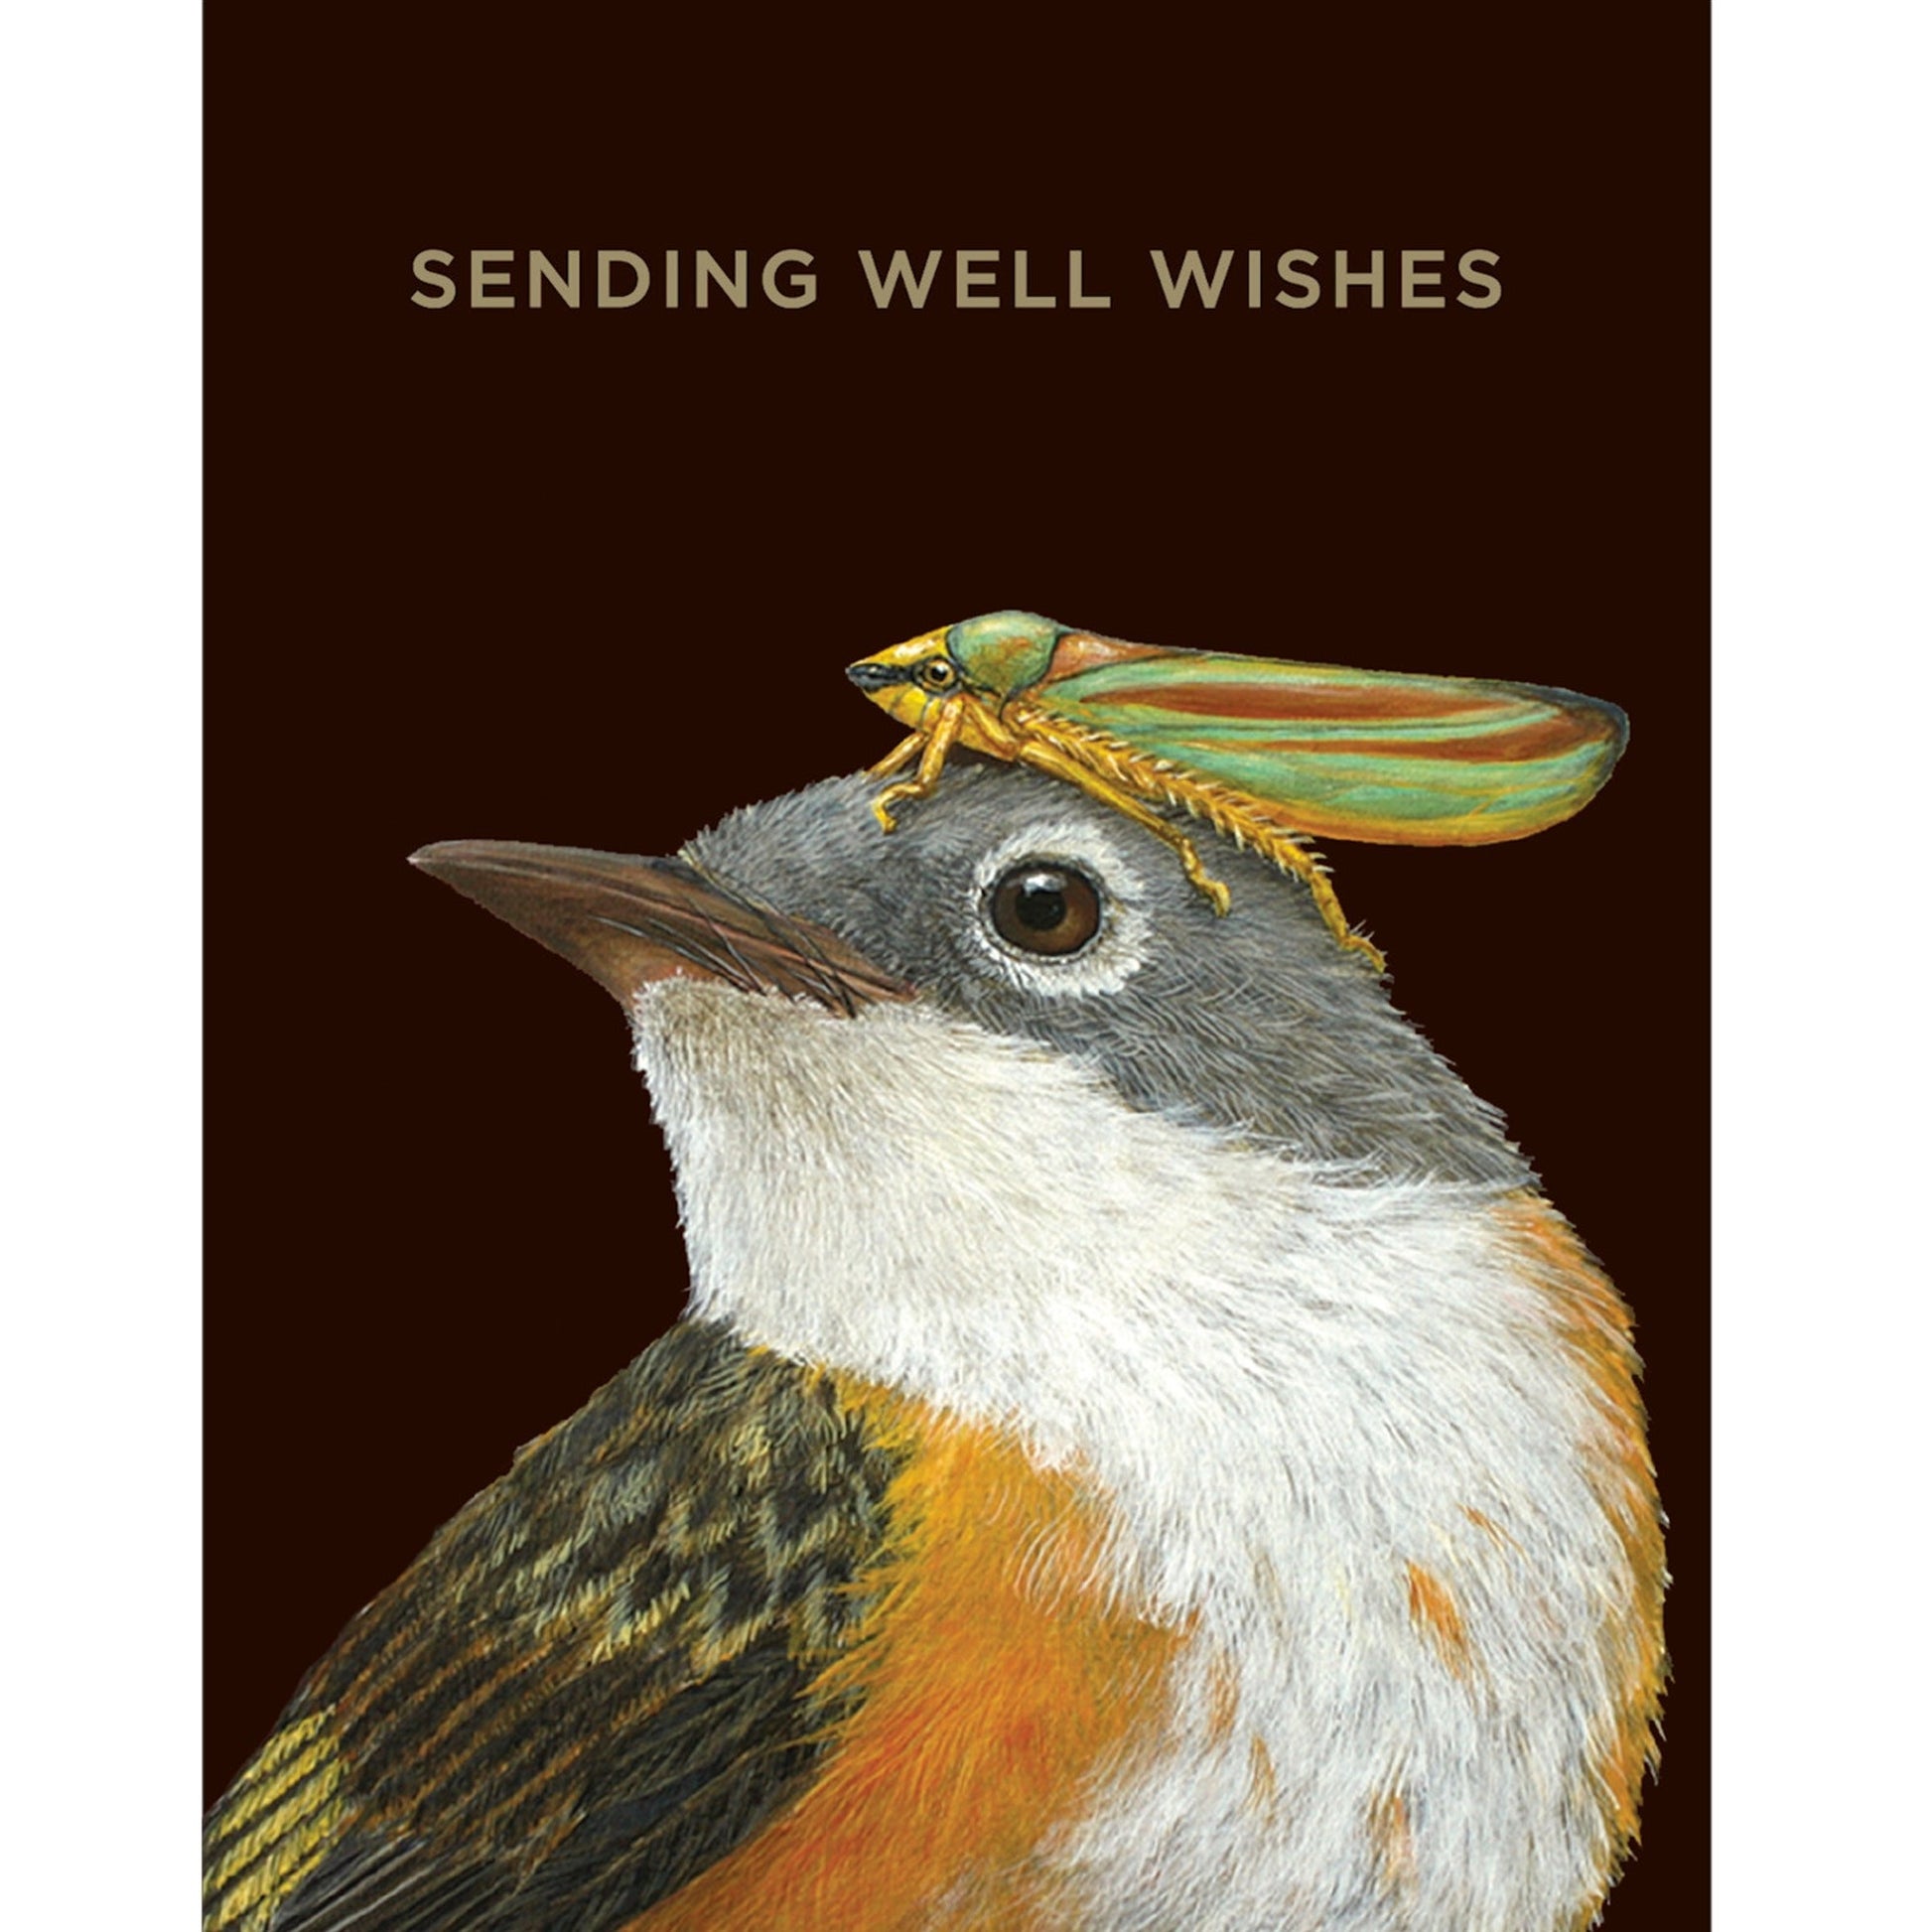 A cute little bird with a katydid on its head. Sending well wishes to all your friends.